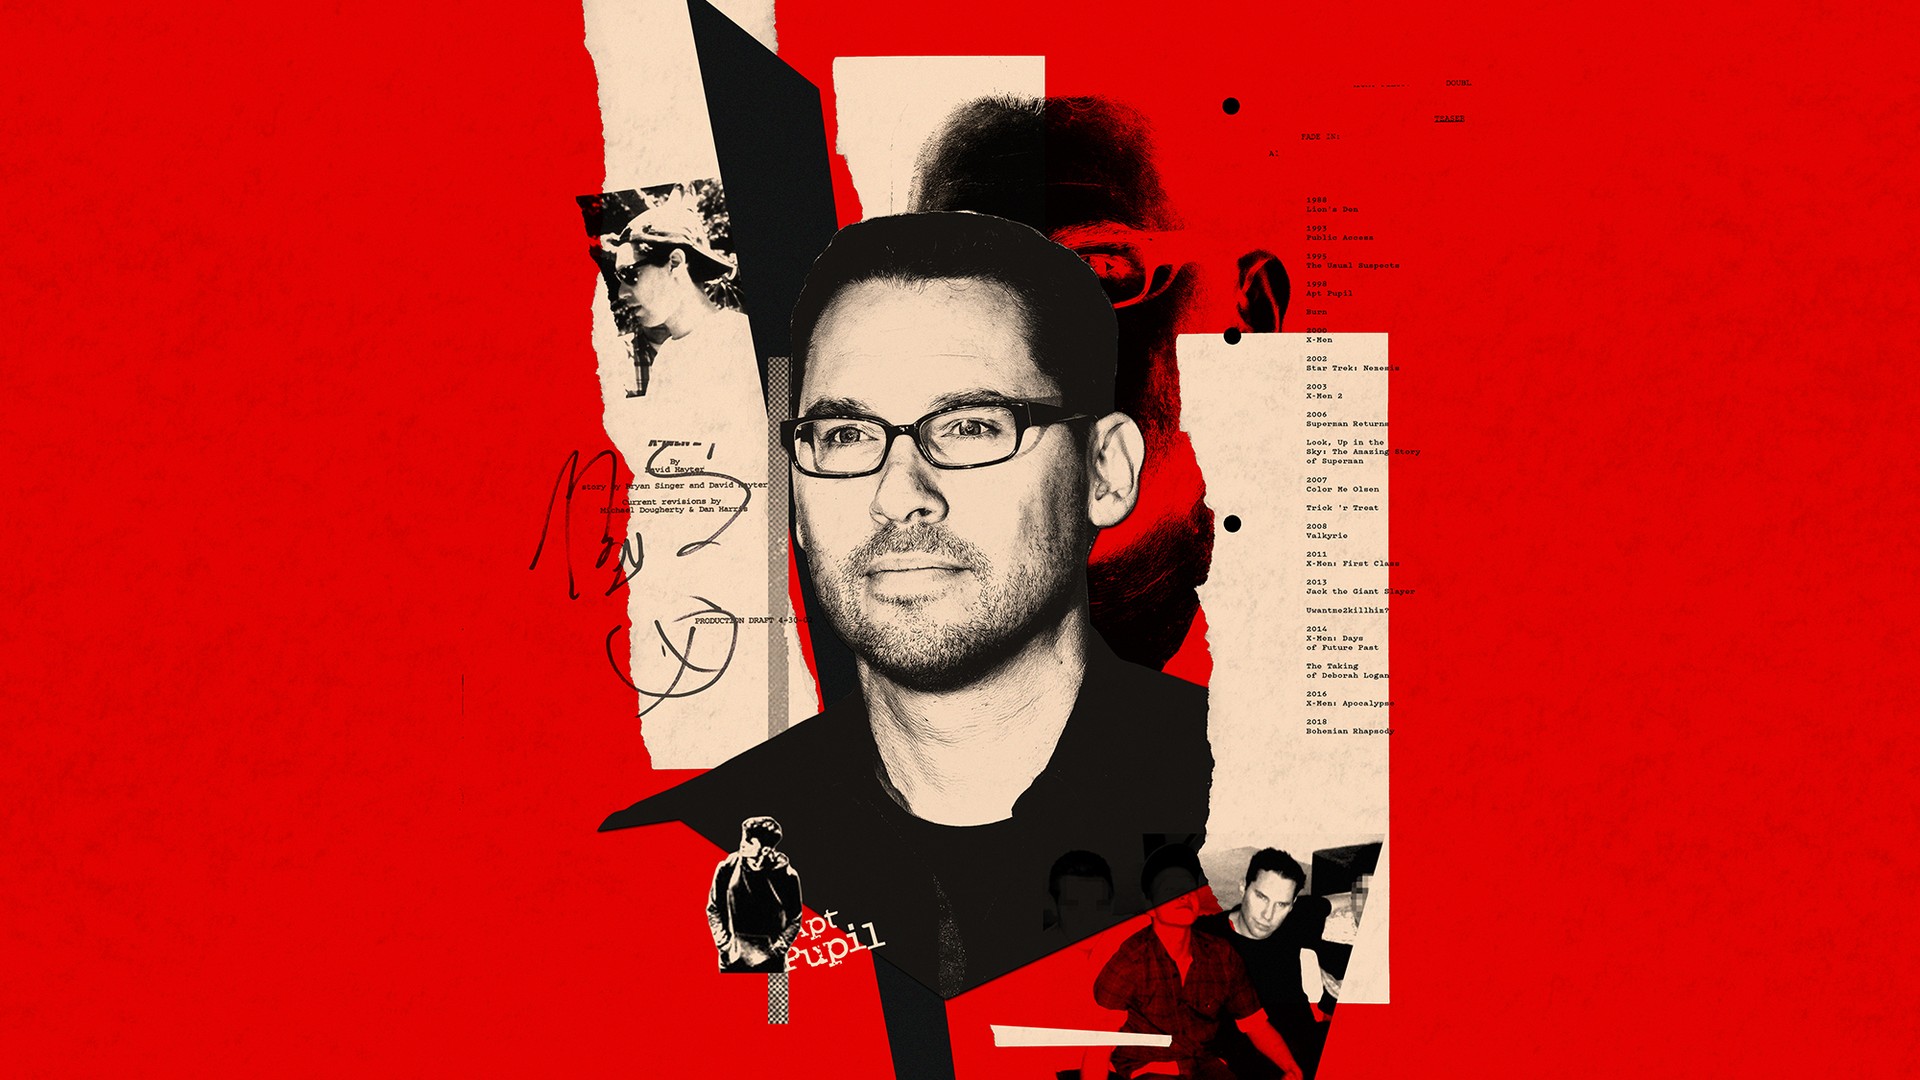 Family Orgy Nude - Bryan Singer's Accusers Speak Out - The Atlantic